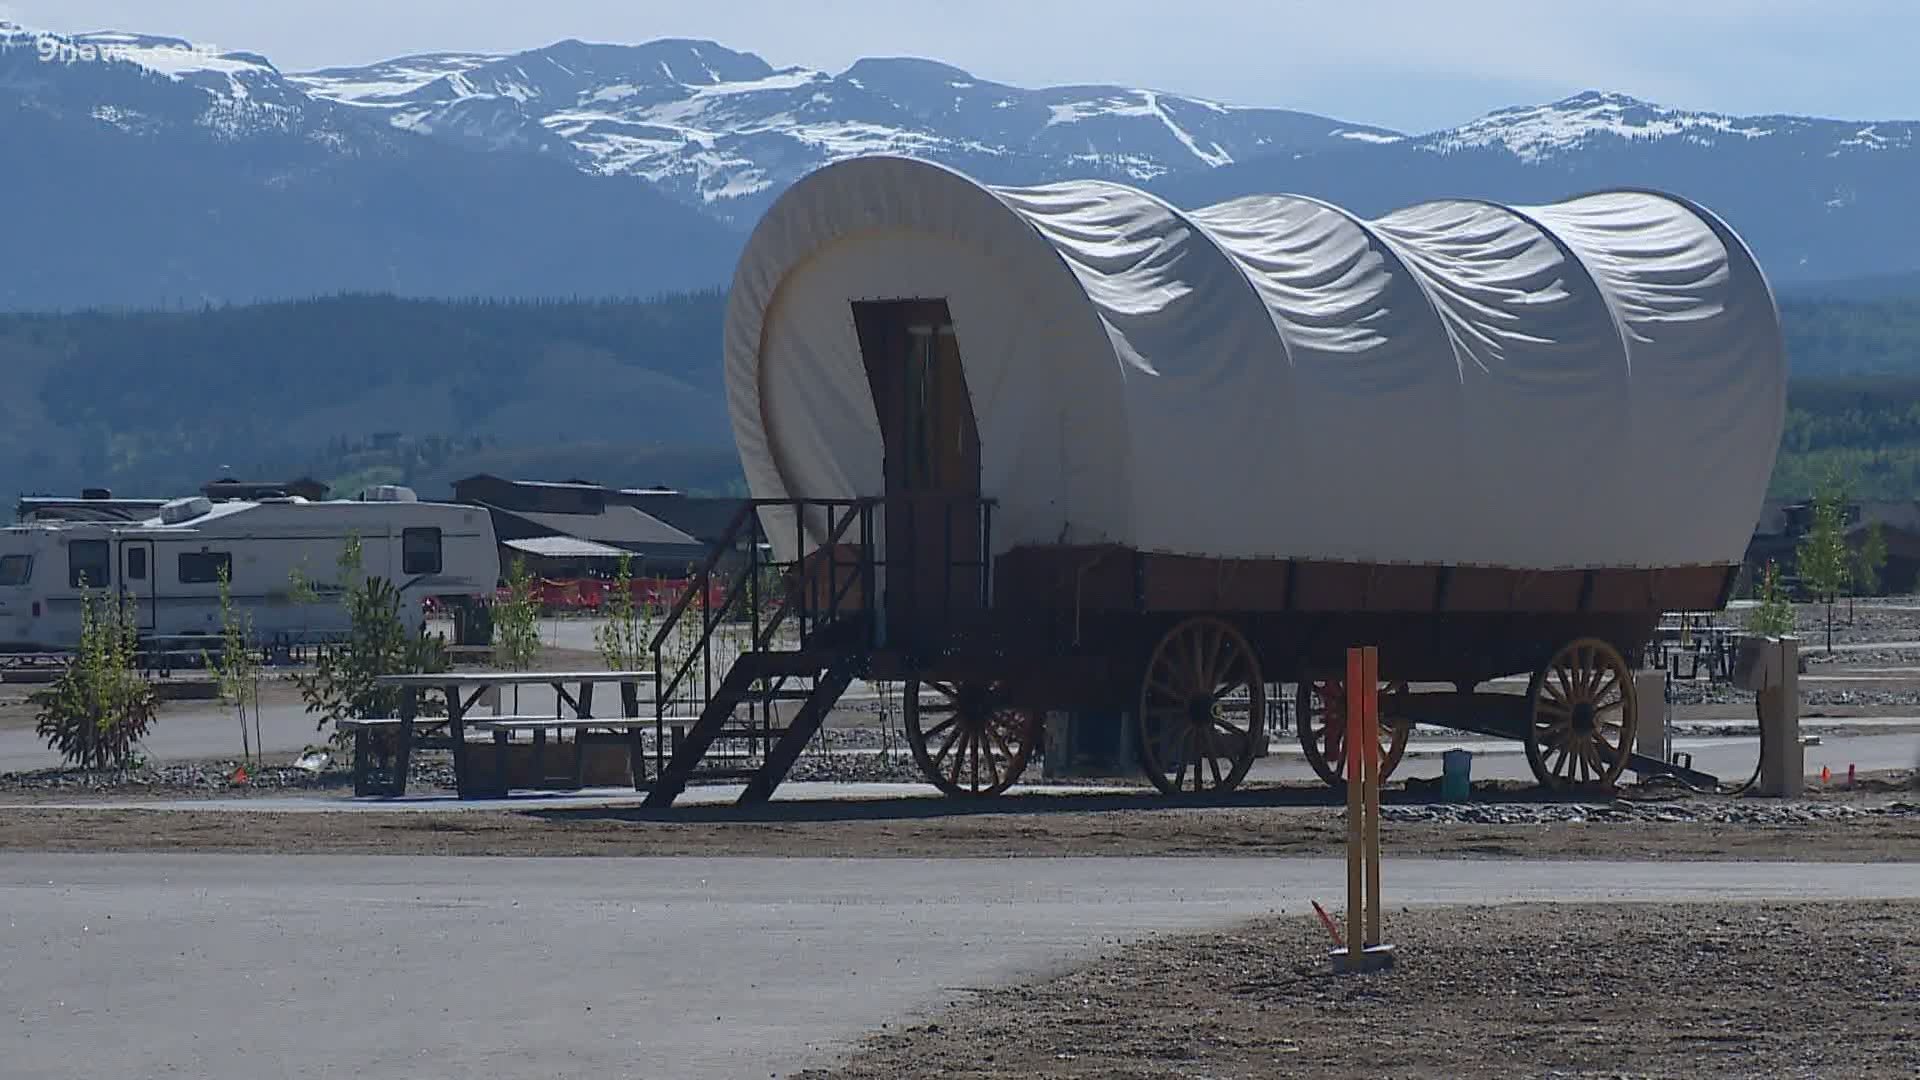 River Run Ranch in Granby is now offering camping in covered wagons so you can feel like a pioneer.